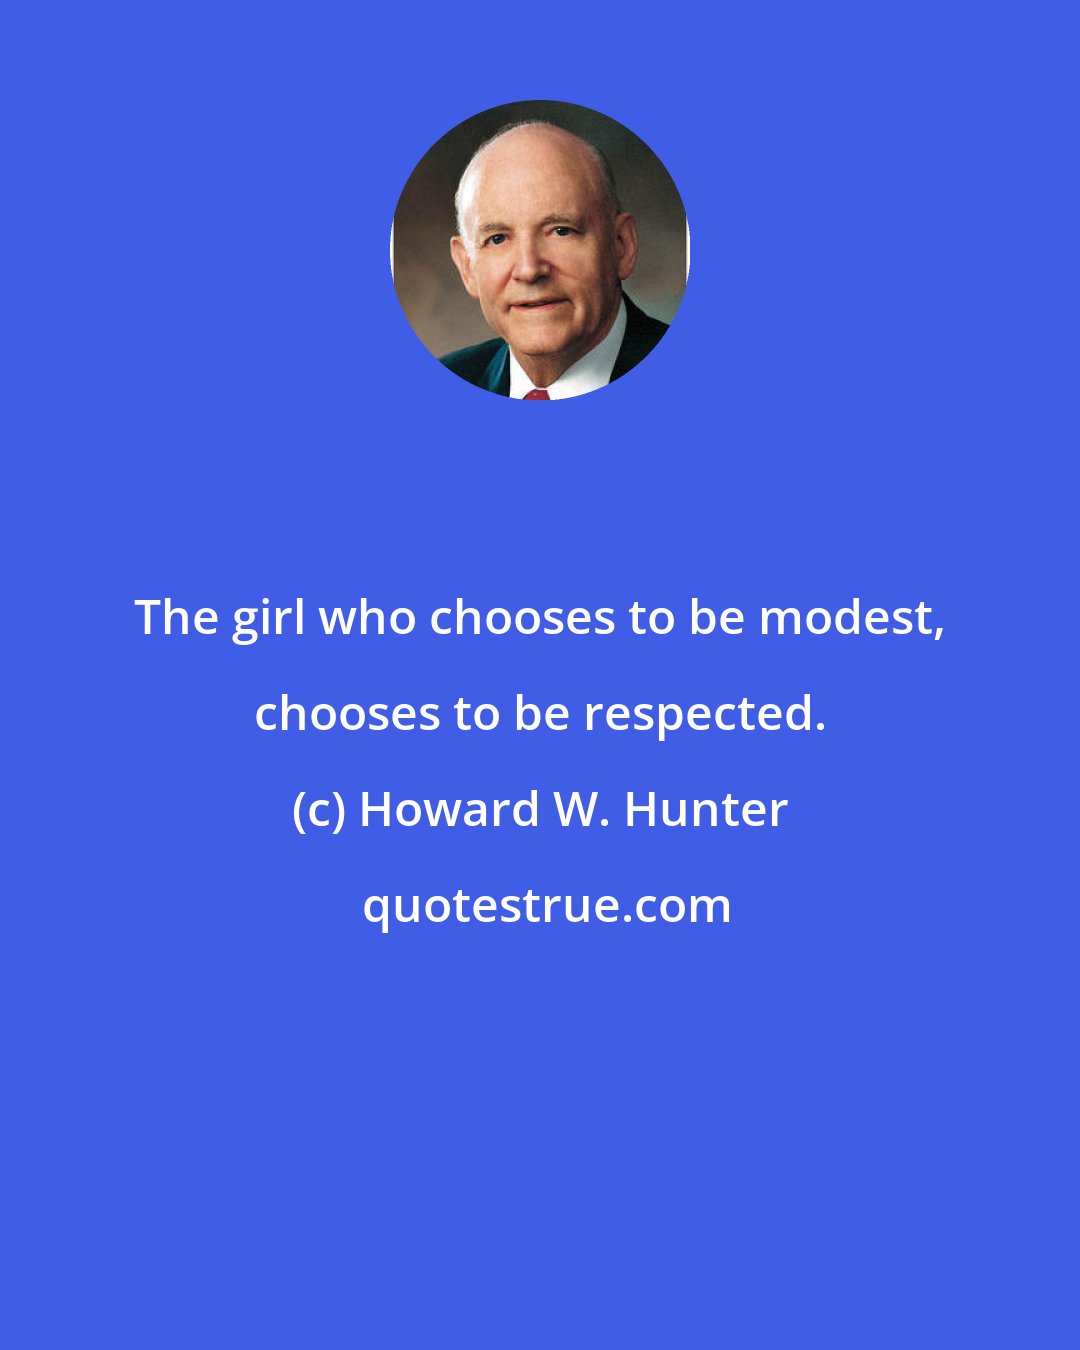 Howard W. Hunter: The girl who chooses to be modest, chooses to be respected.